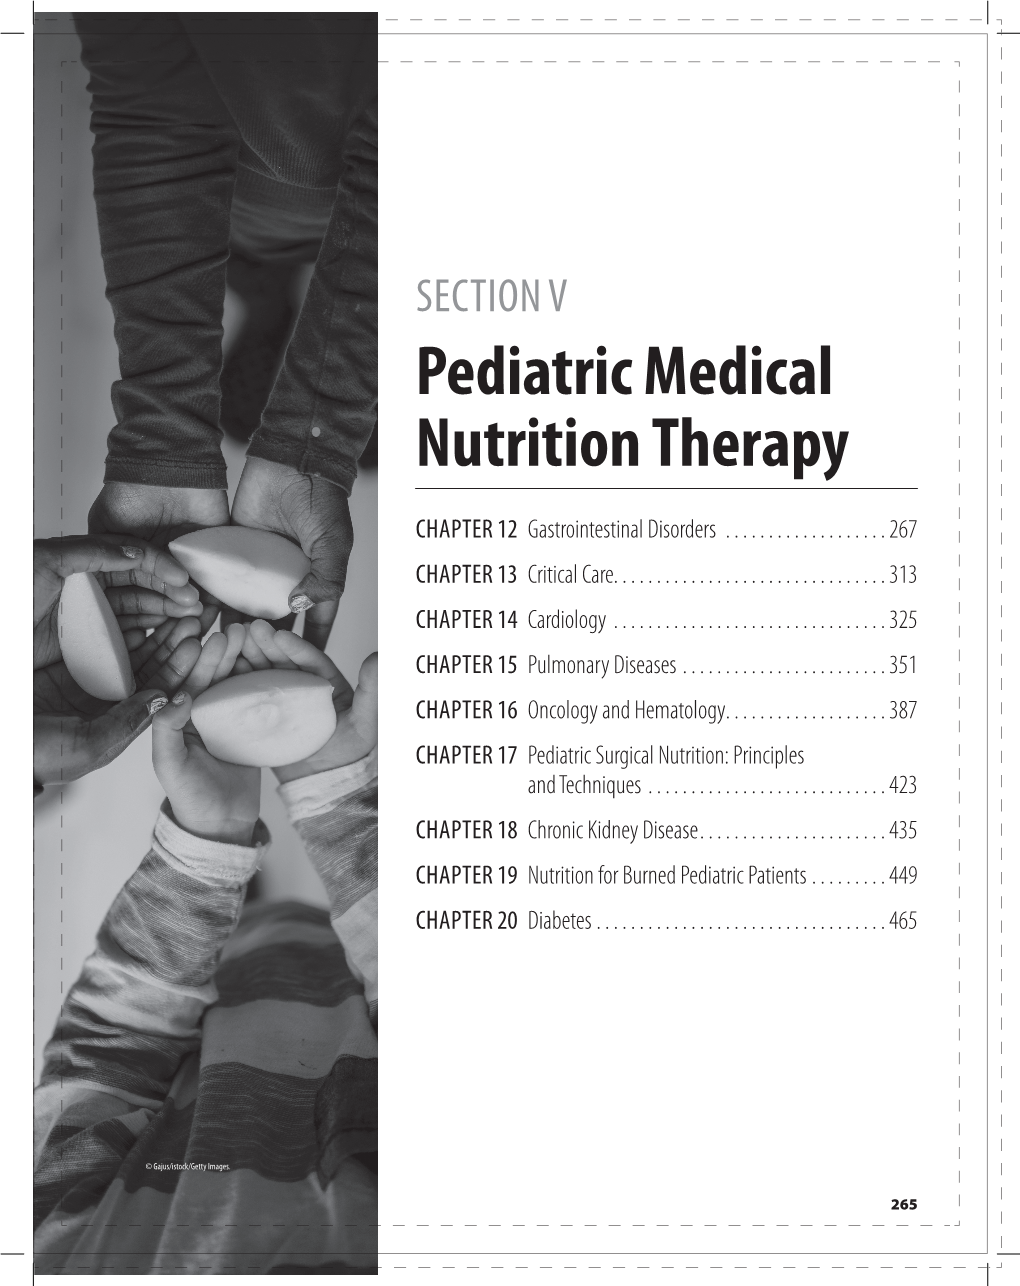 Pediatric Medical Nutrition Therapy